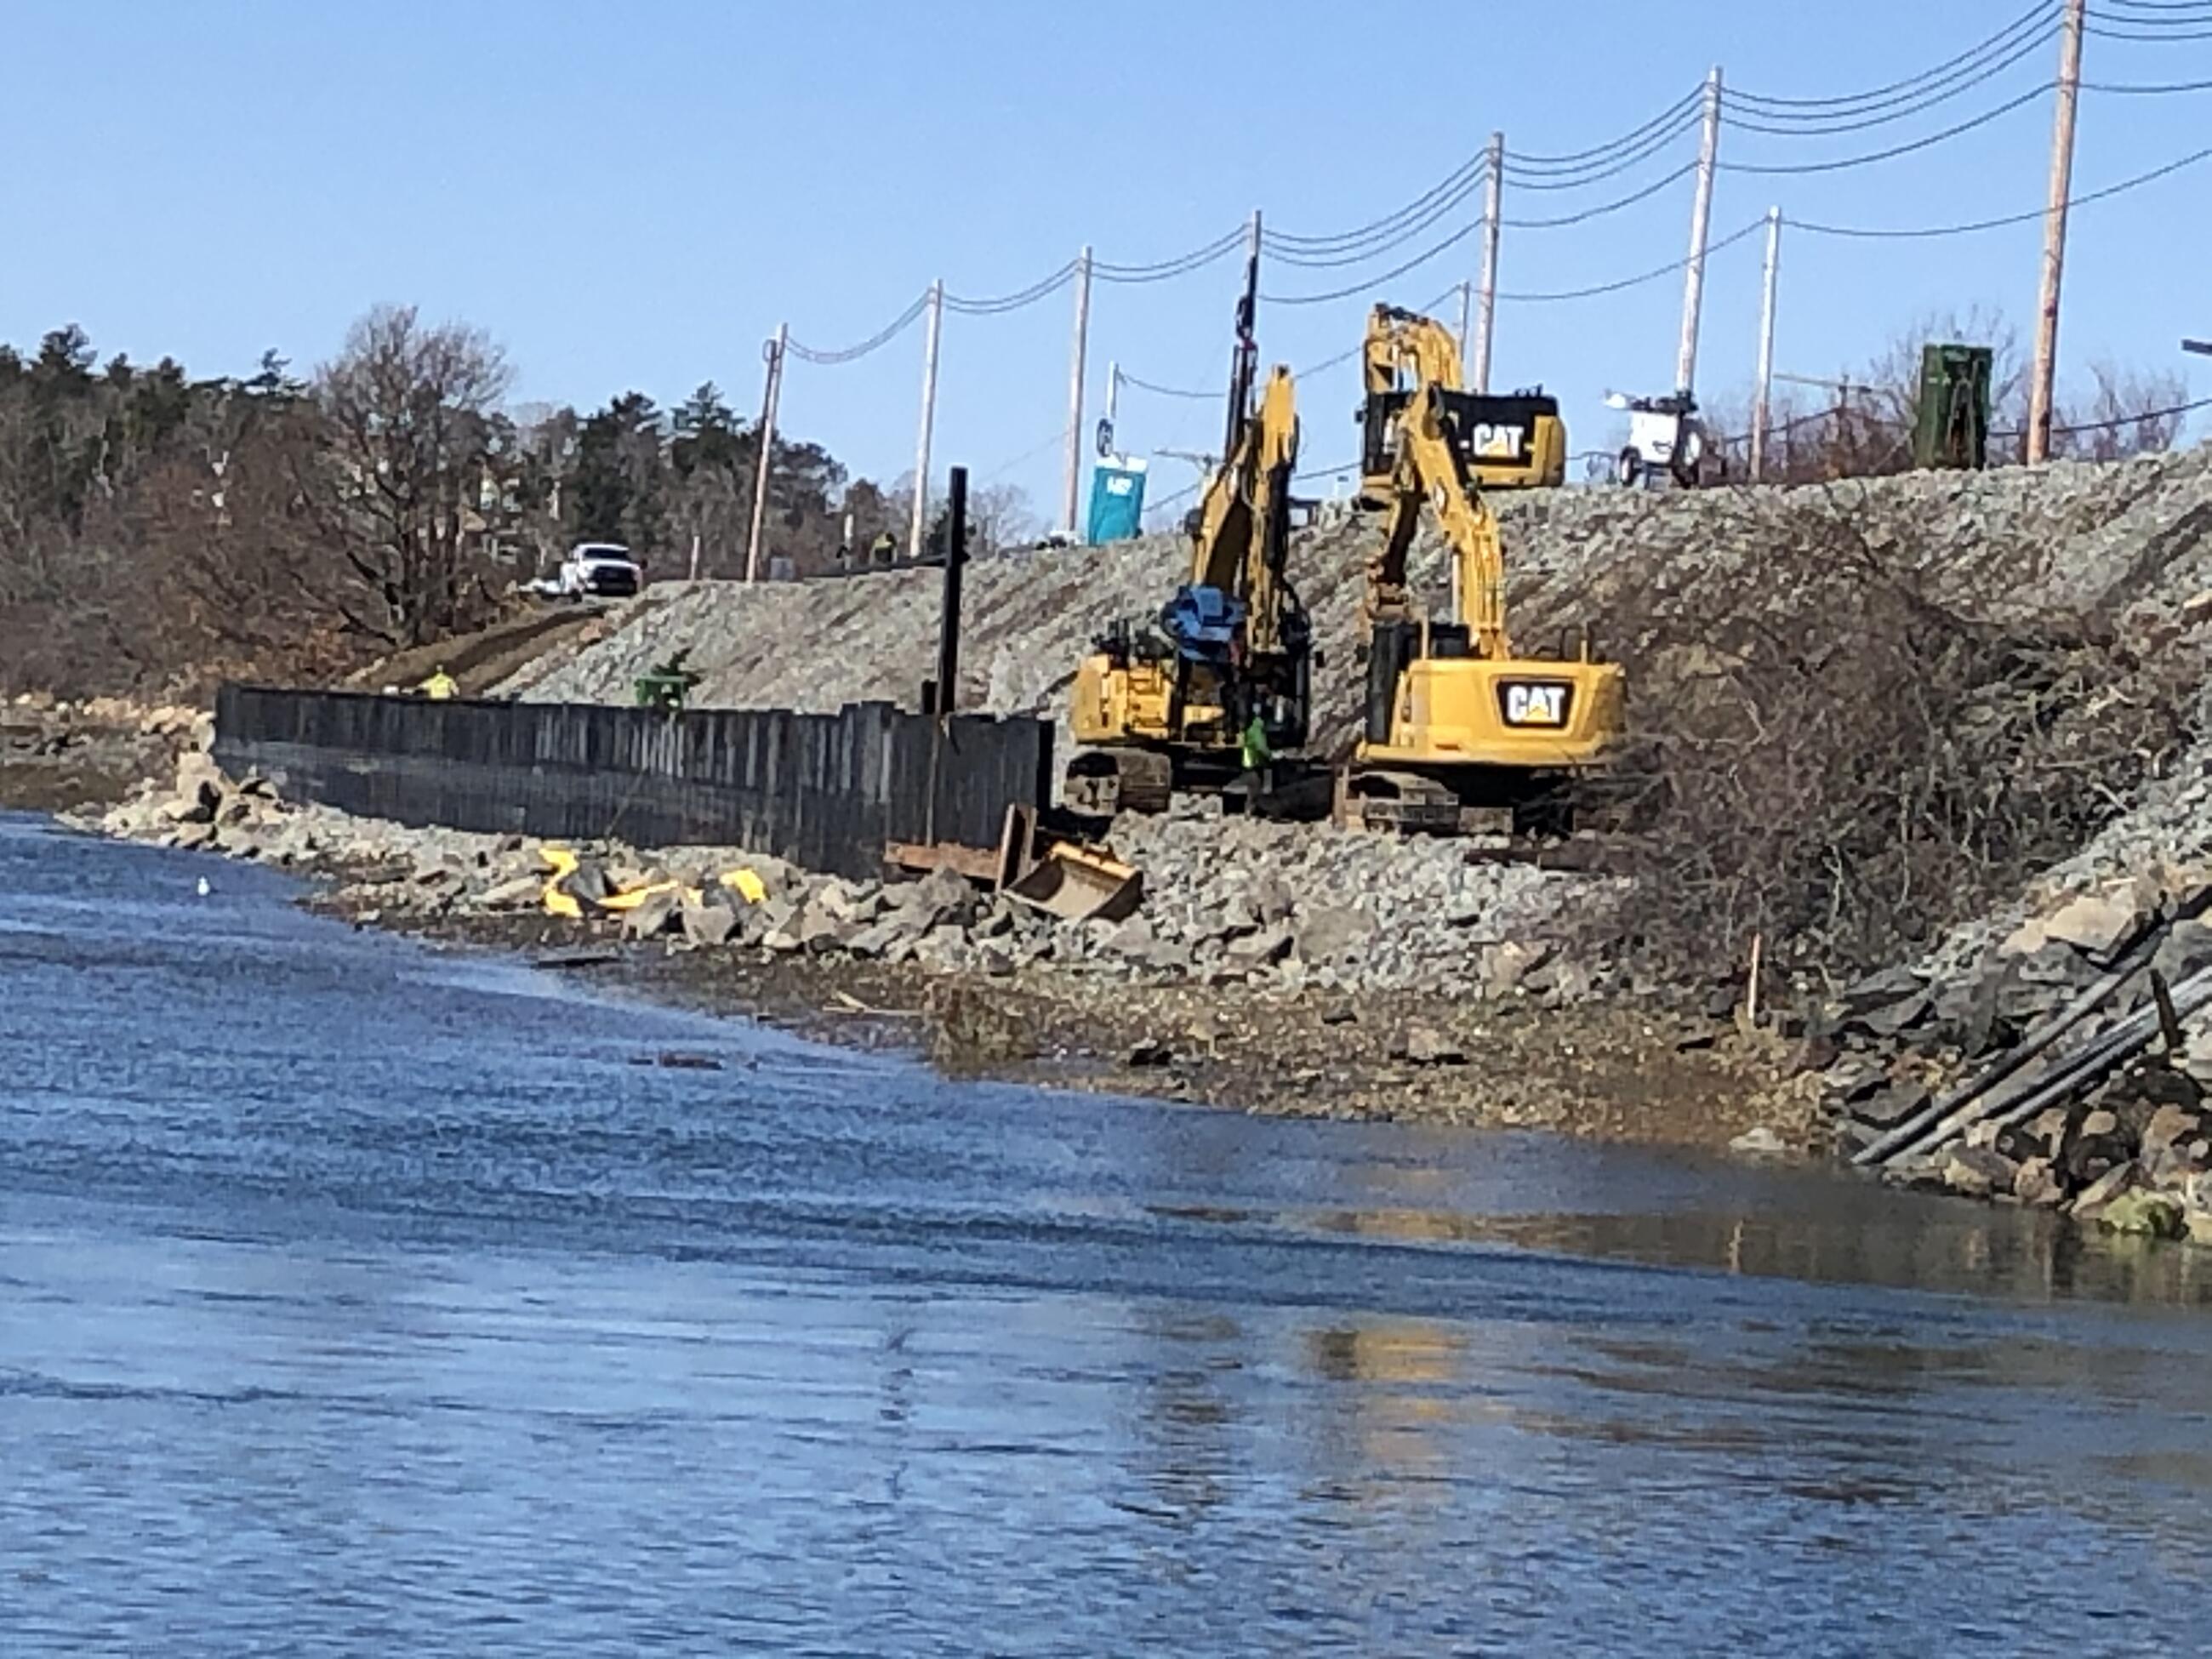 Two yellow excavators working on a pile of gravel on the river shoreline